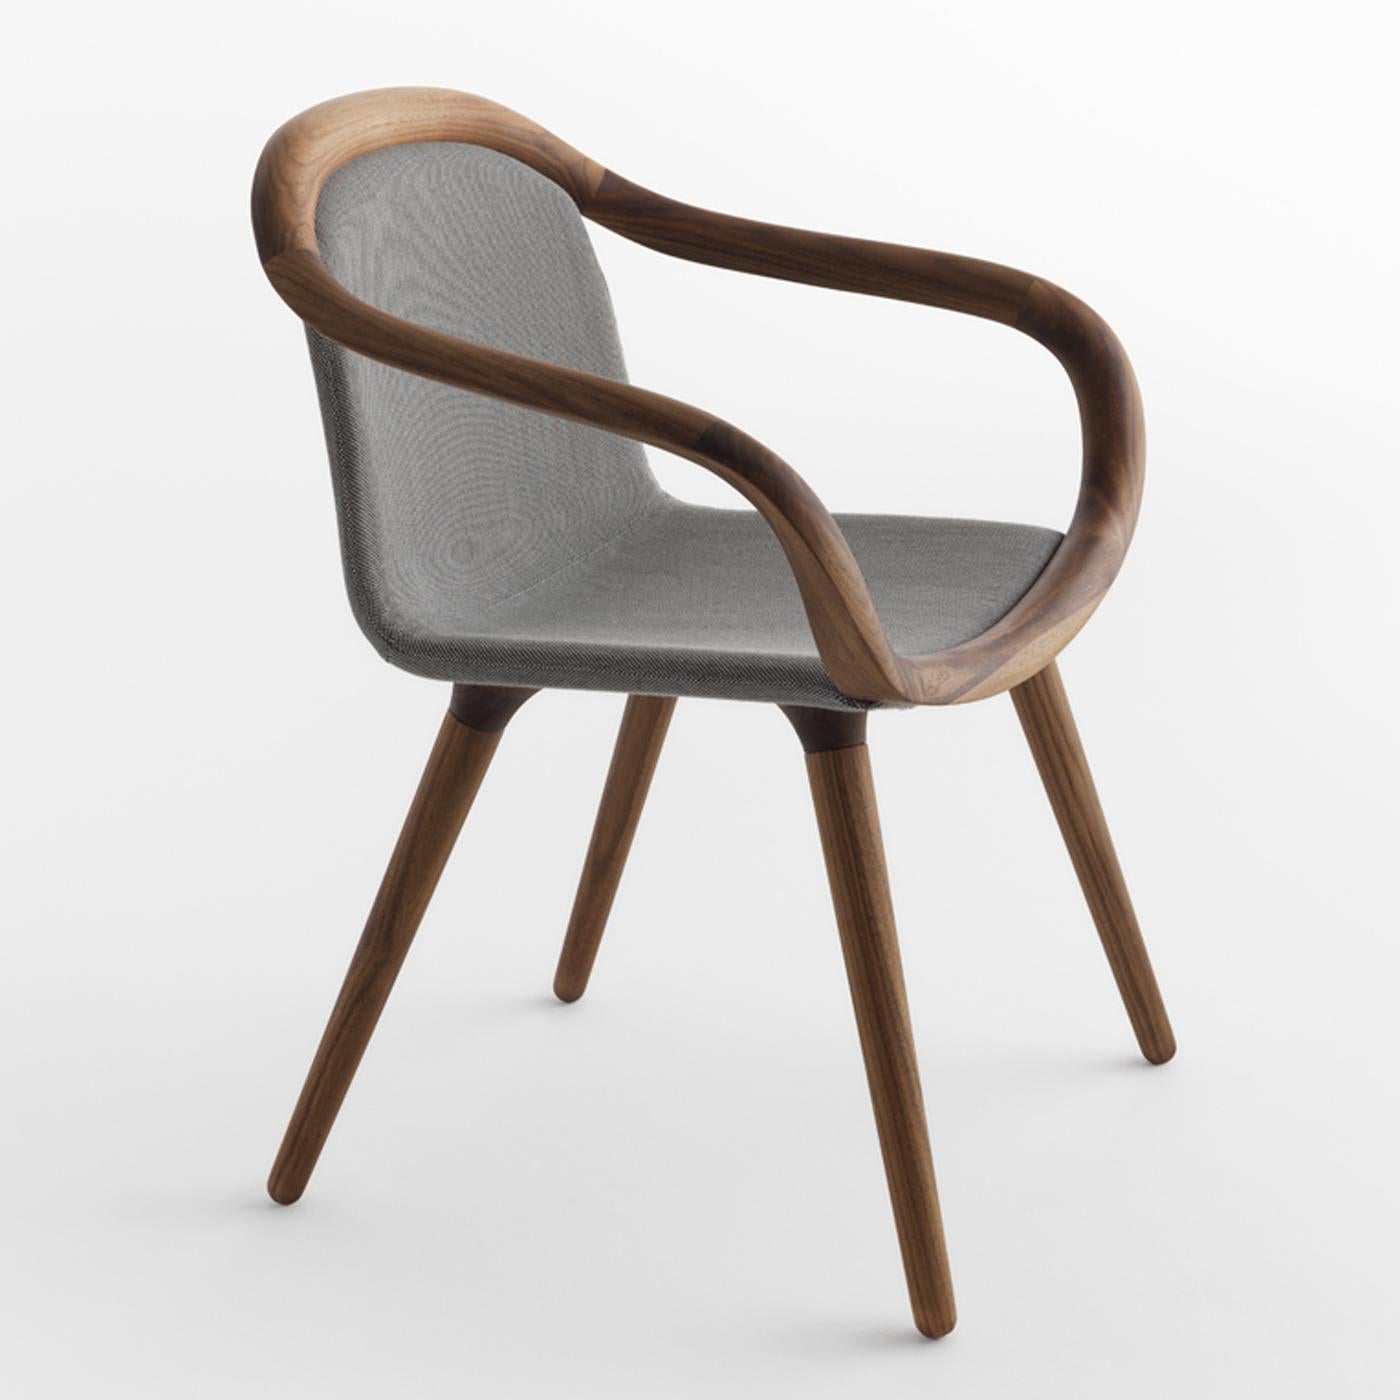 Sinuous and gentle lines depict the silhouette of this exquisite chair, exuding comfort and elegance. Resting on a solid walnut wood structure with slanted legs and wavy armrests, it features seat and backrests upholstered in light blue fabric (also